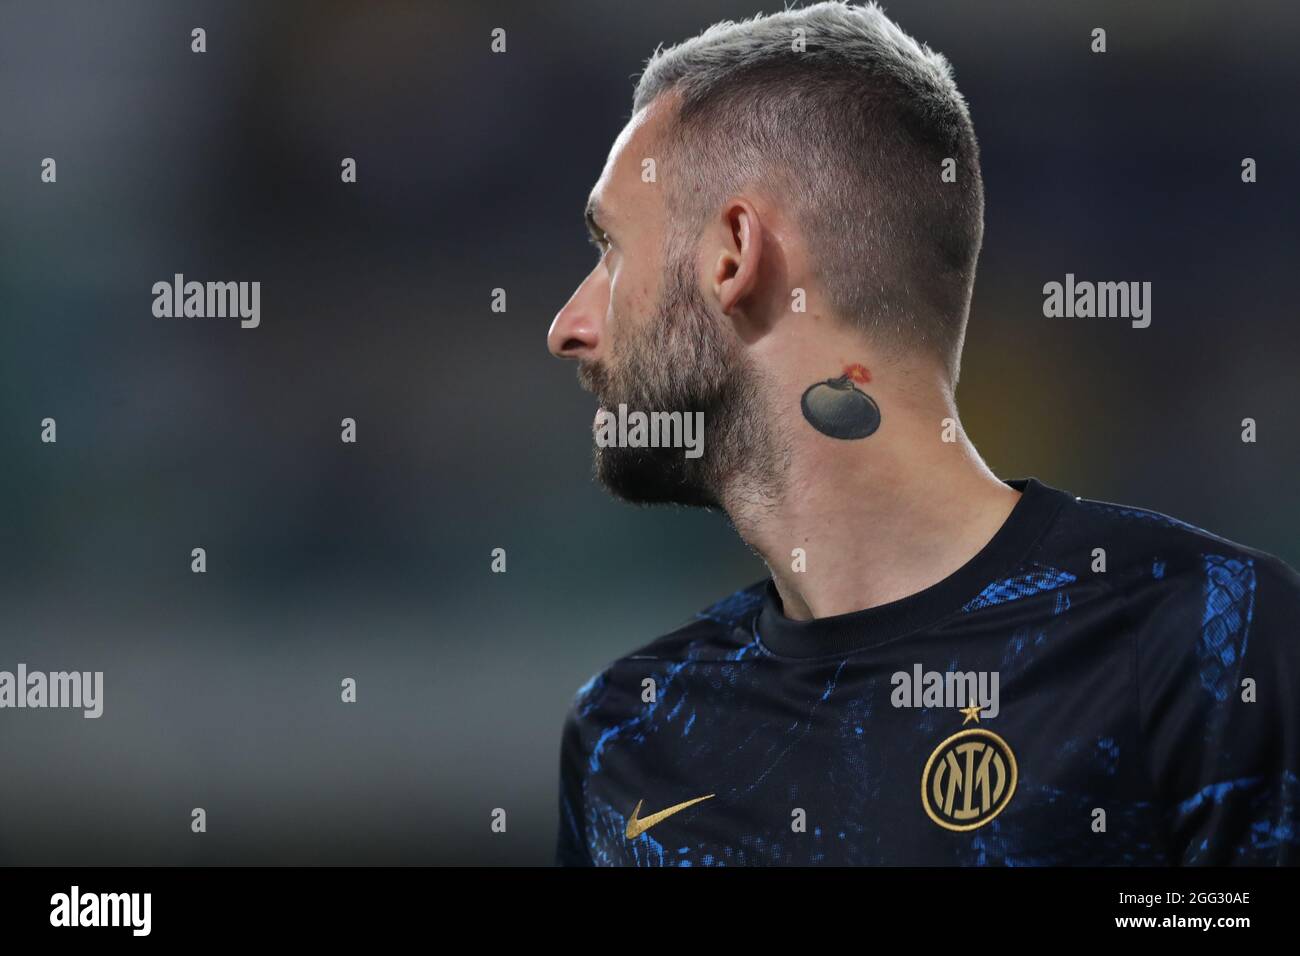 Page 2 - Tattoo Match High Resolution Stock Photography and Images - Alamy